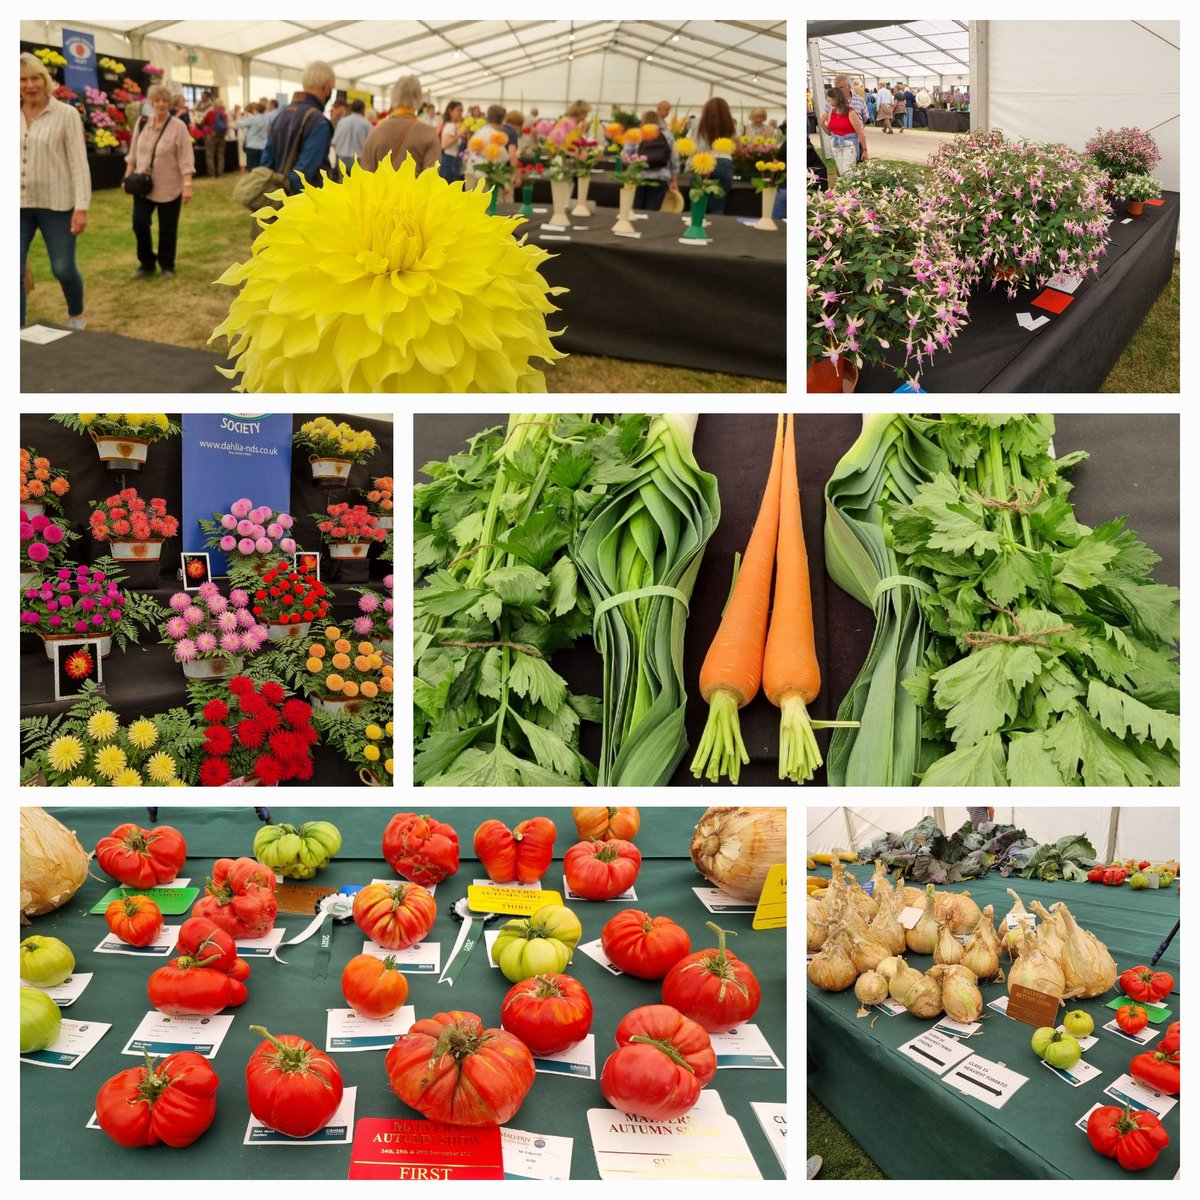 Going to the Malvern Autumn Show tomorrow and hoping to meet some of our Tettenhall Gardening friends there. Below, pictures from last year.#Tettenhall #gardening #Malvernautumnshow